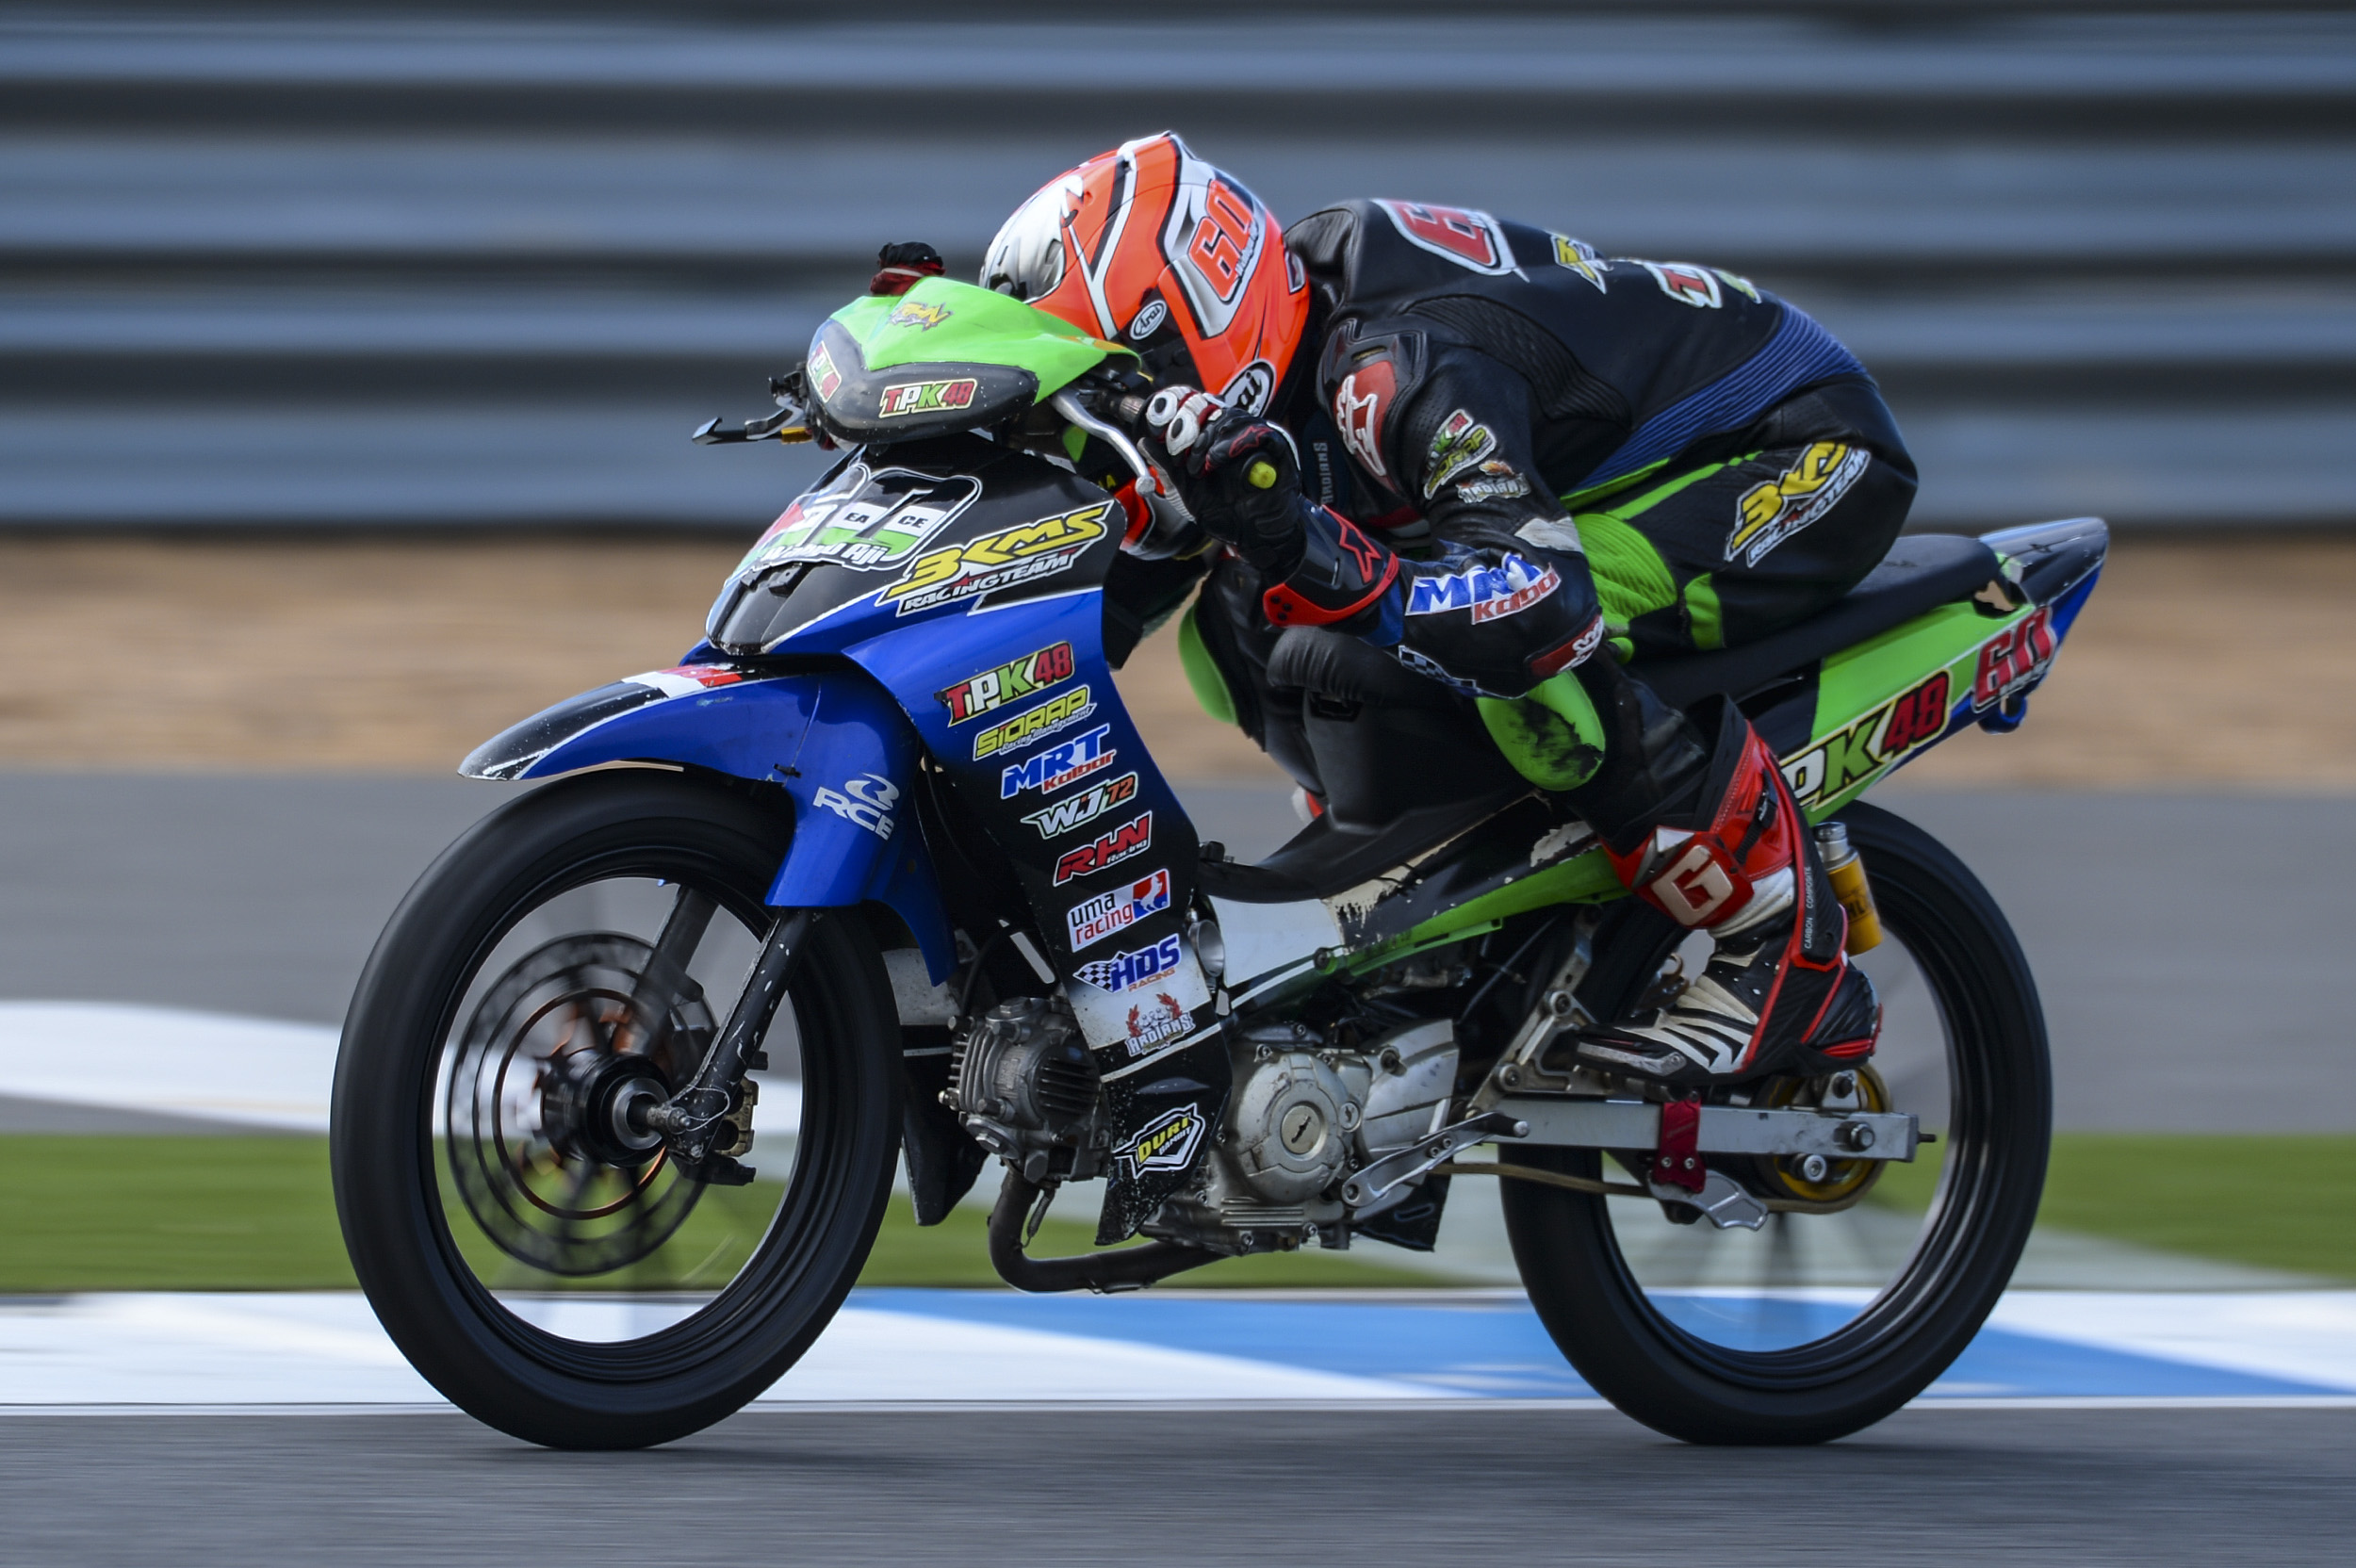 WAHYU LEADS FINAL CHARGE FOR UNDERBONE 130cc TITLE HUNT